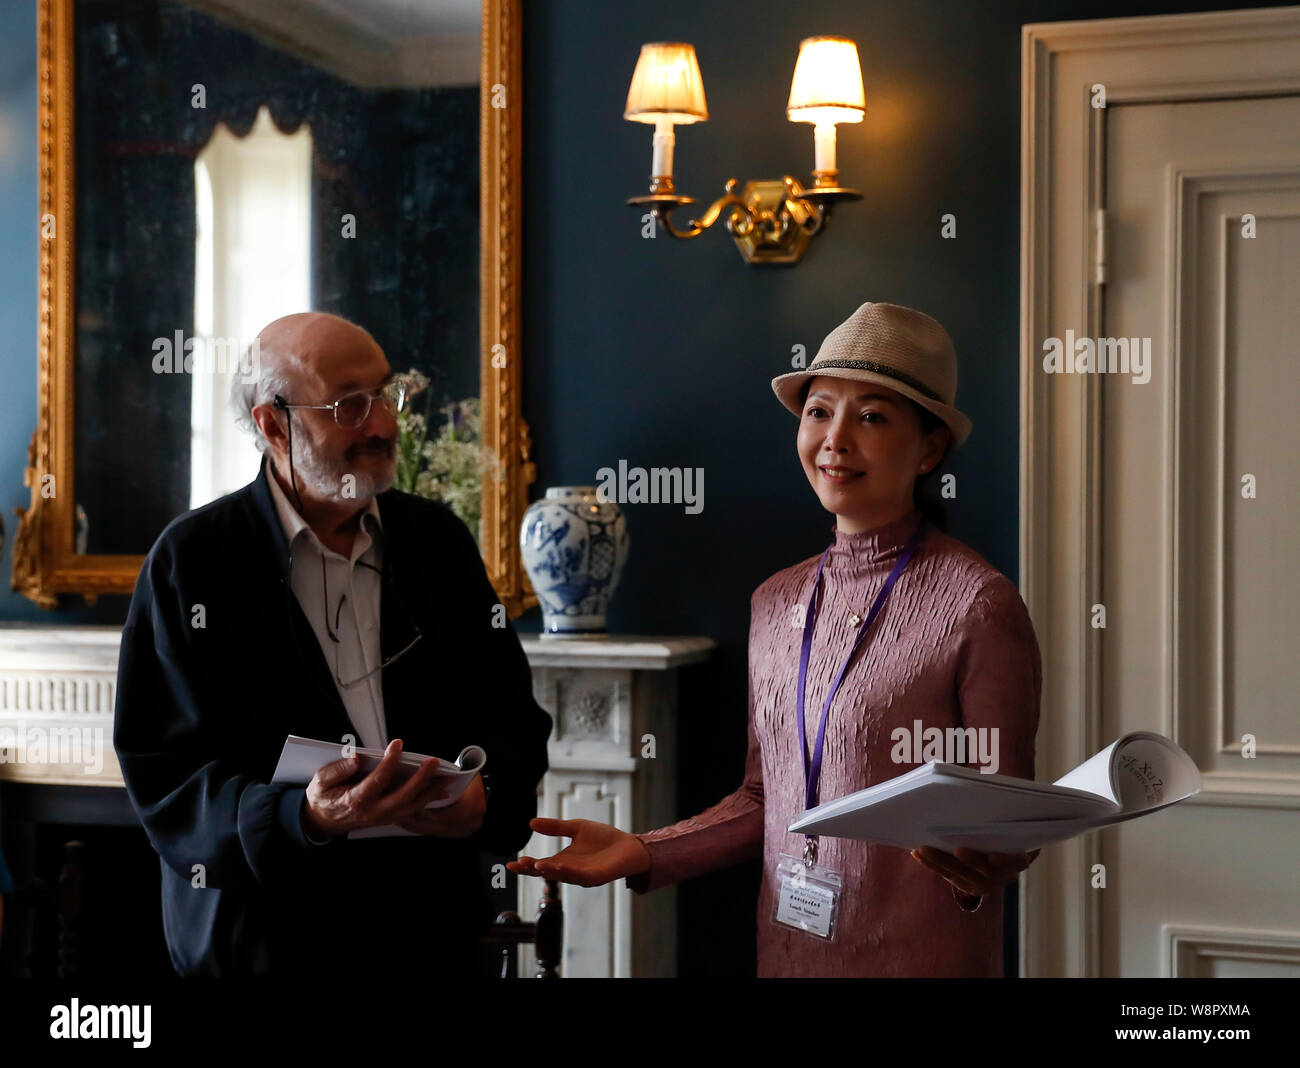 Beijing, Cambridge. 9th Aug, 2019. A poet (L) reads his poem with a Chinese professional reader during the 5th Cambridge Xu Zhimo Poetry and Art Festival 2019 at King's College, University of Cambridge, in Cambridge, Britain on Aug. 9, 2019. Credit: Han Yan/Xinhua/Alamy Live News Stock Photo